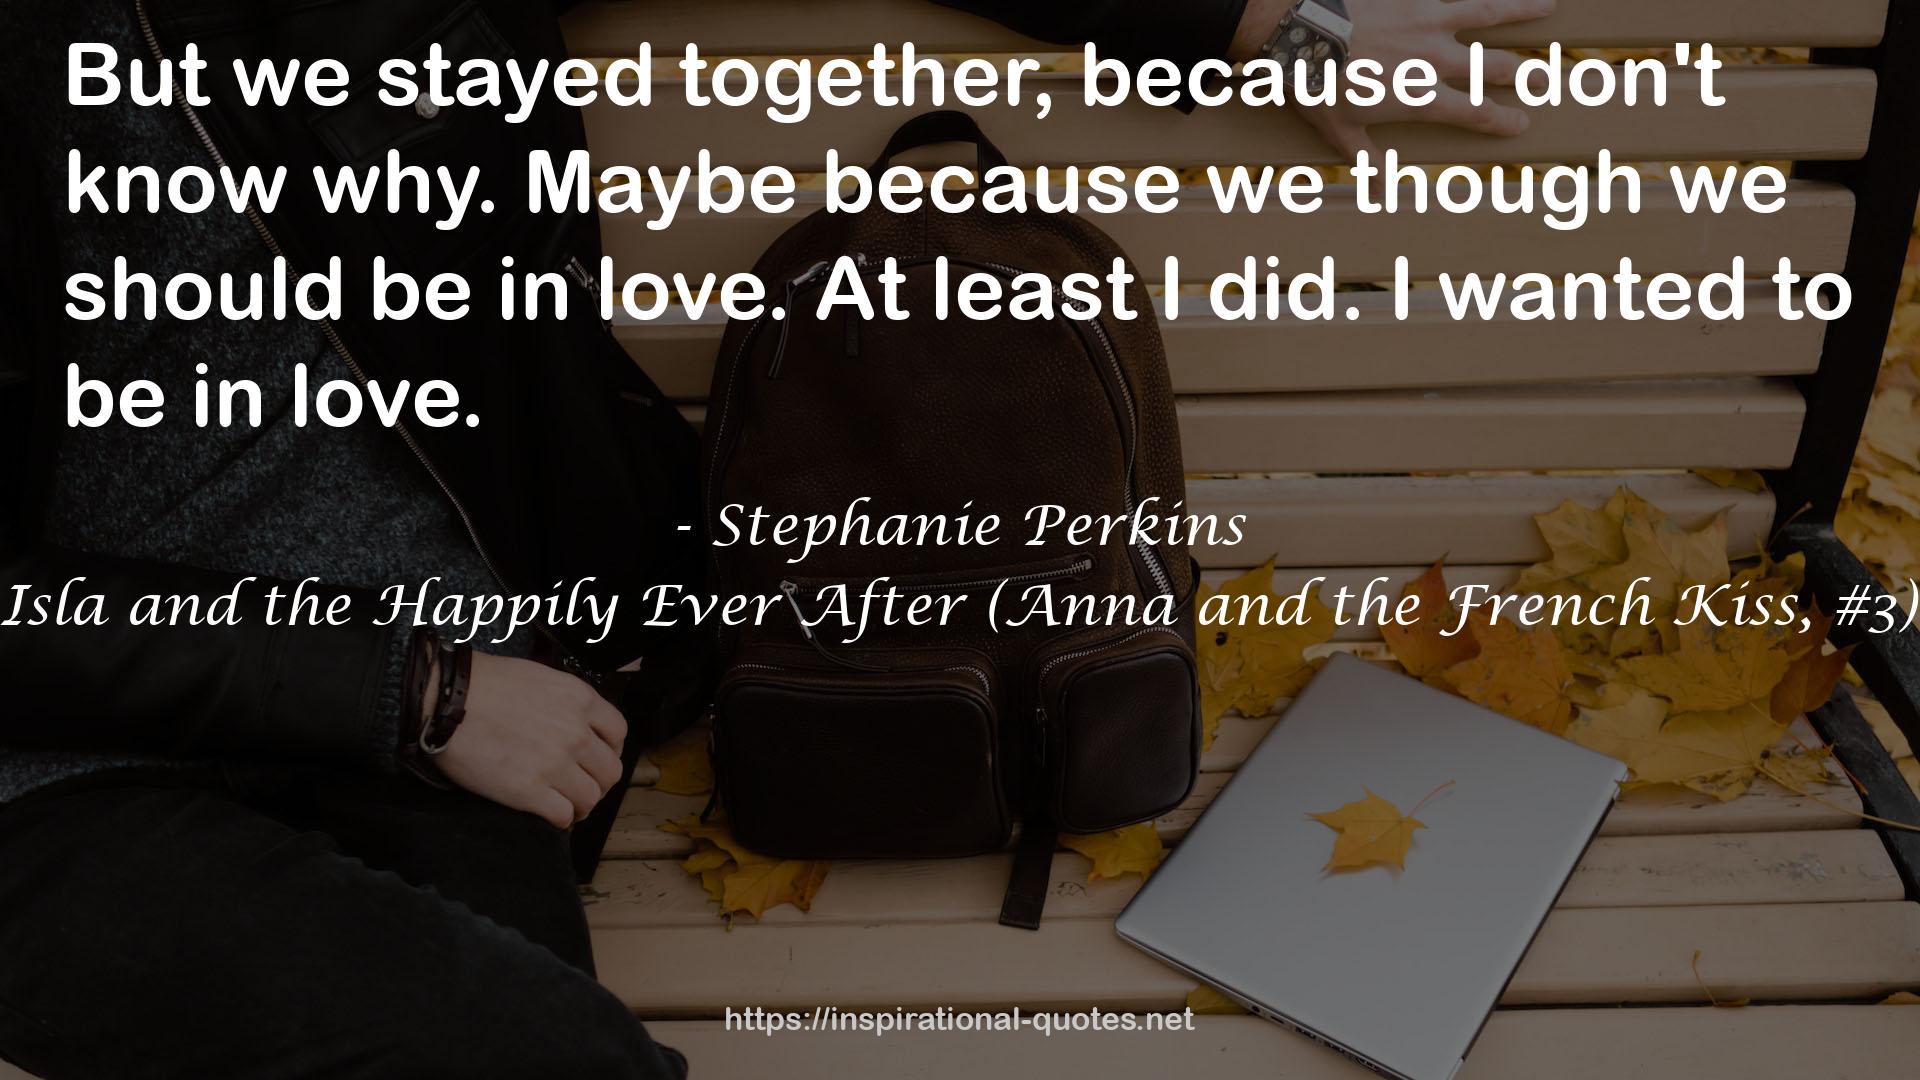 Isla and the Happily Ever After (Anna and the French Kiss, #3) QUOTES